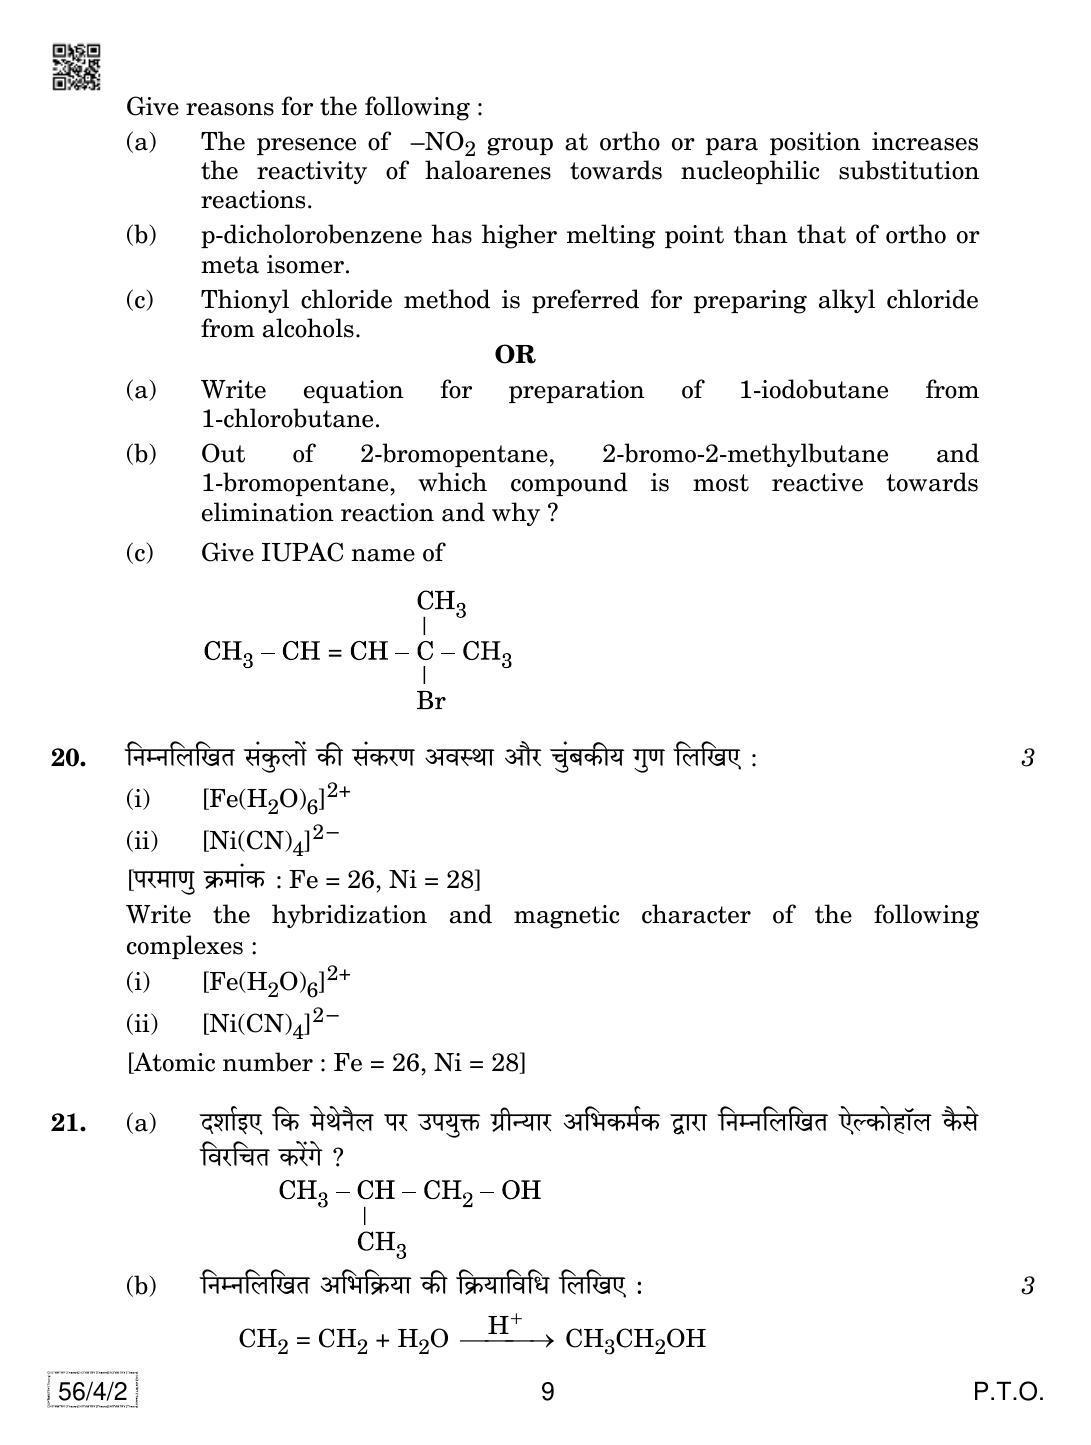 CBSE Class 12 56-4-2 Chemistry 2019 Question Paper - Page 9